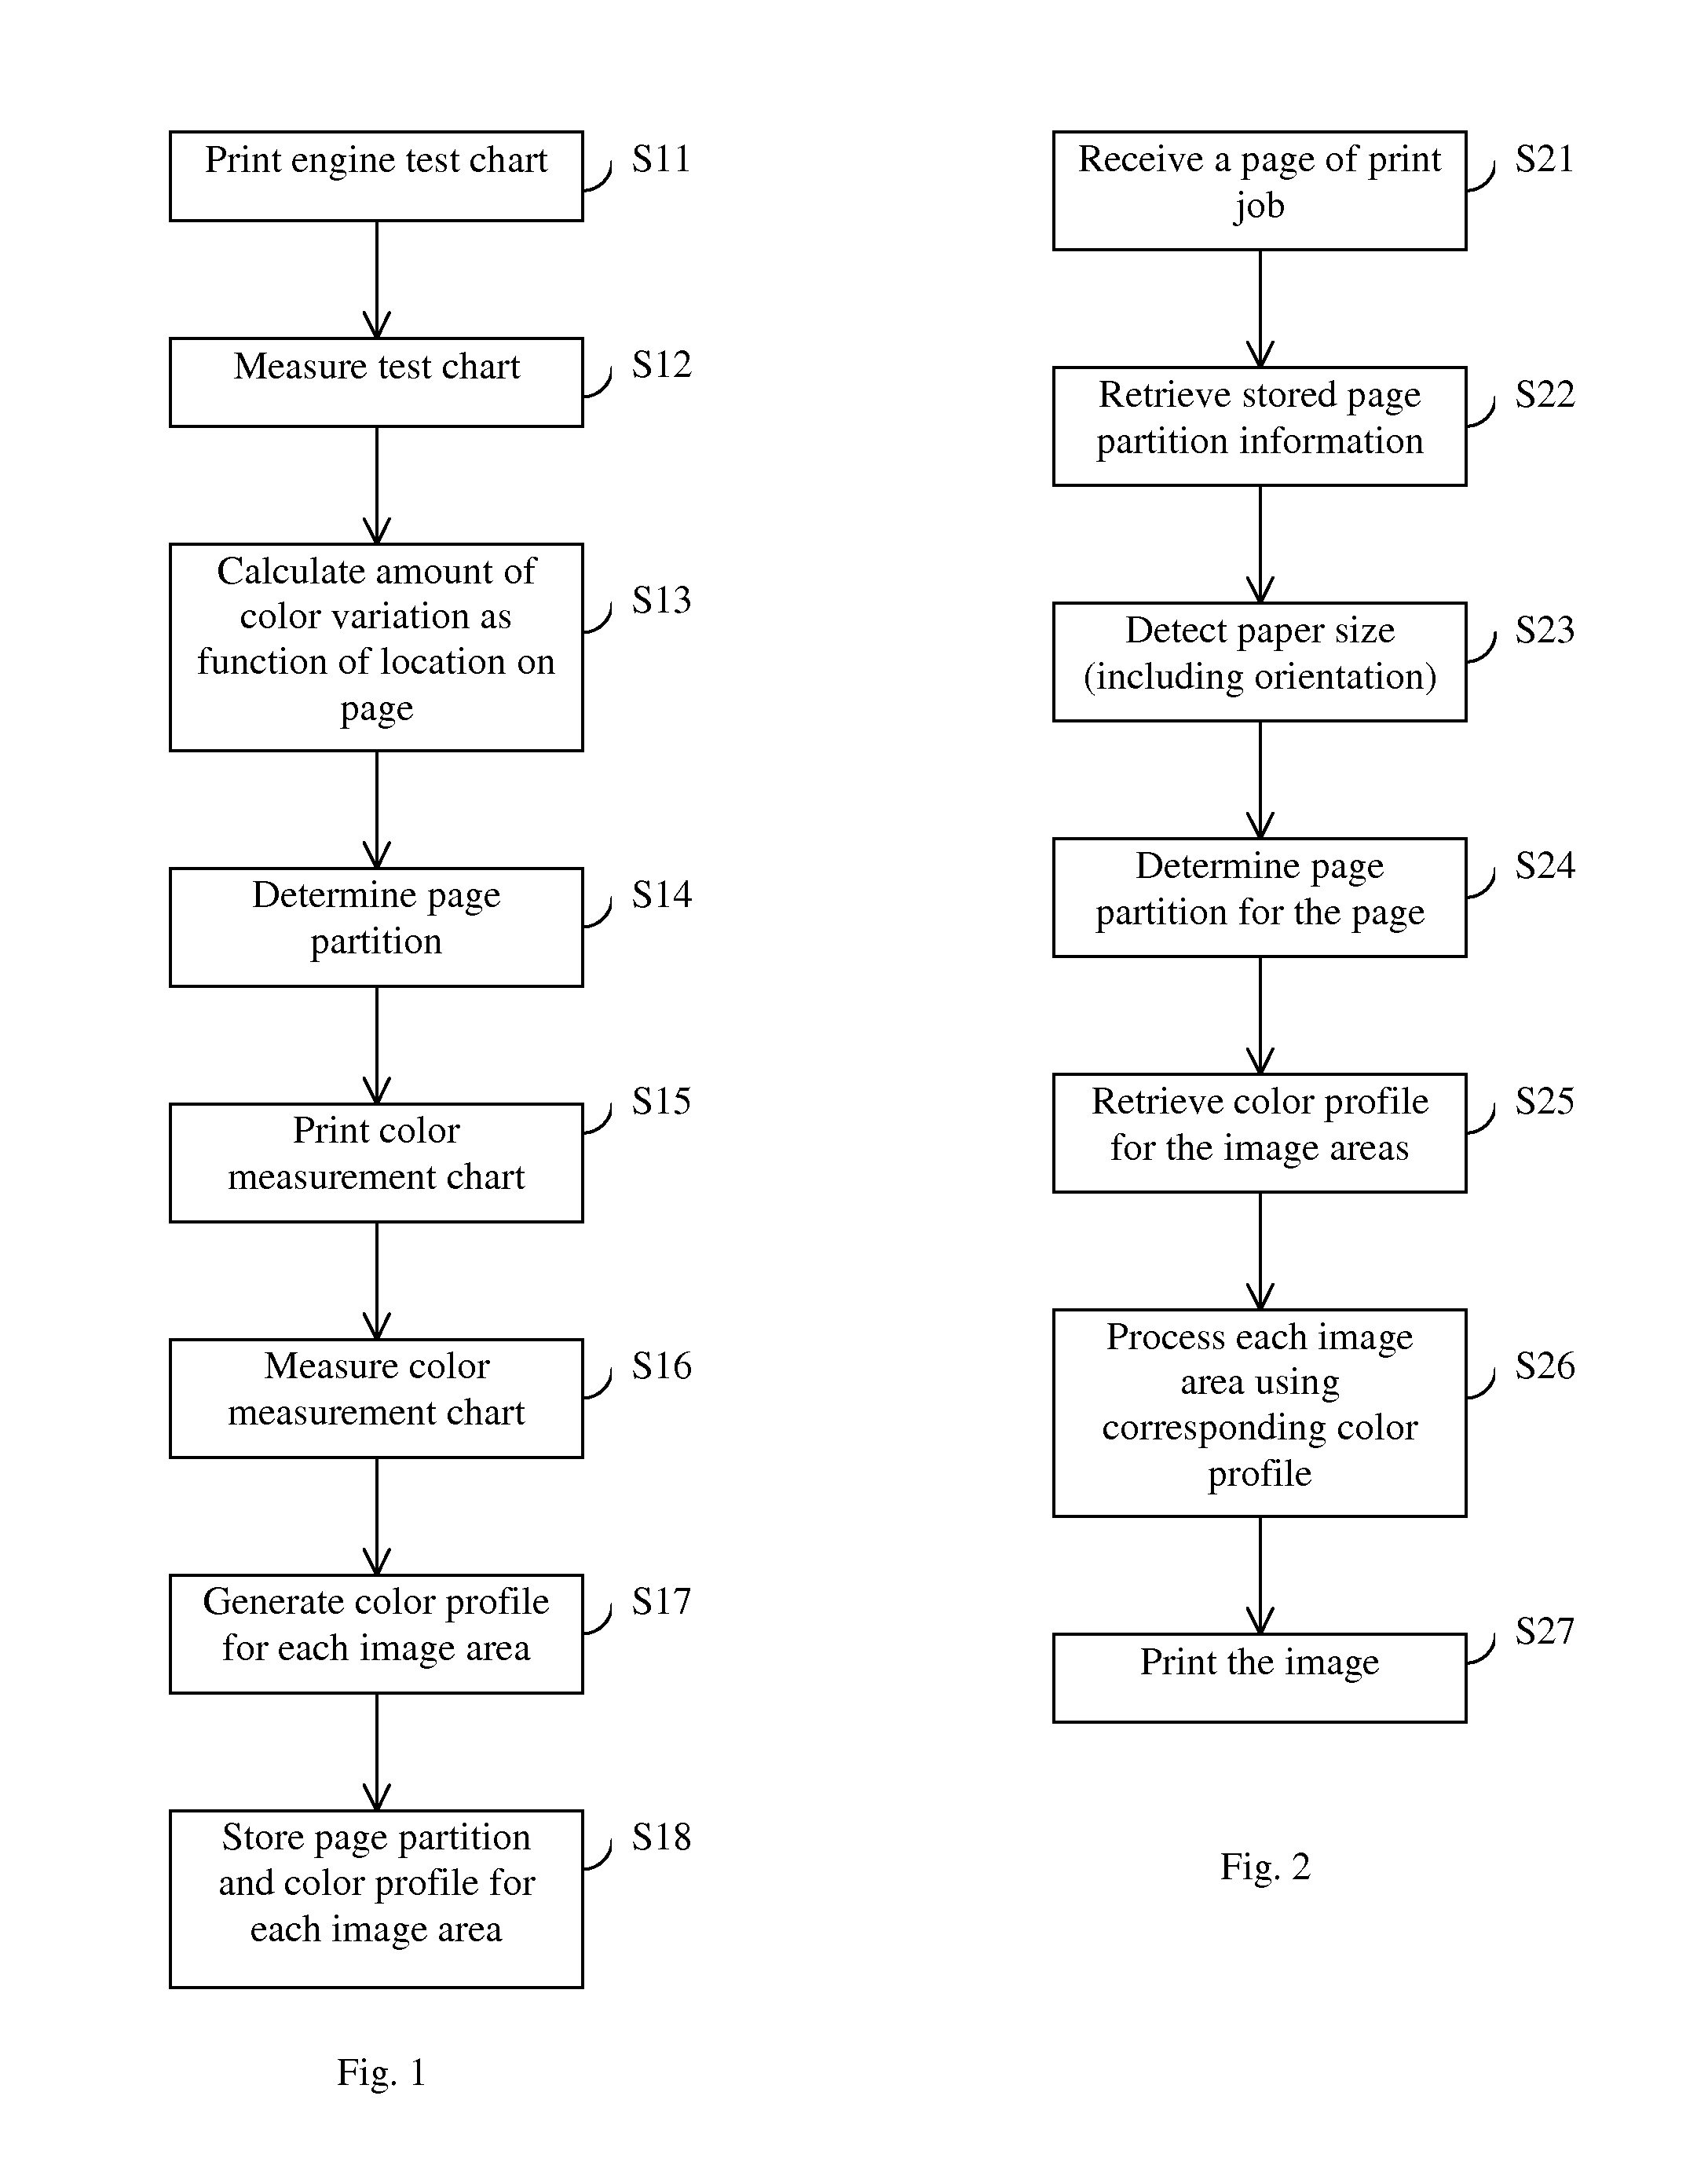 Method for compensating for color variations across a printed page using multiple color profiles